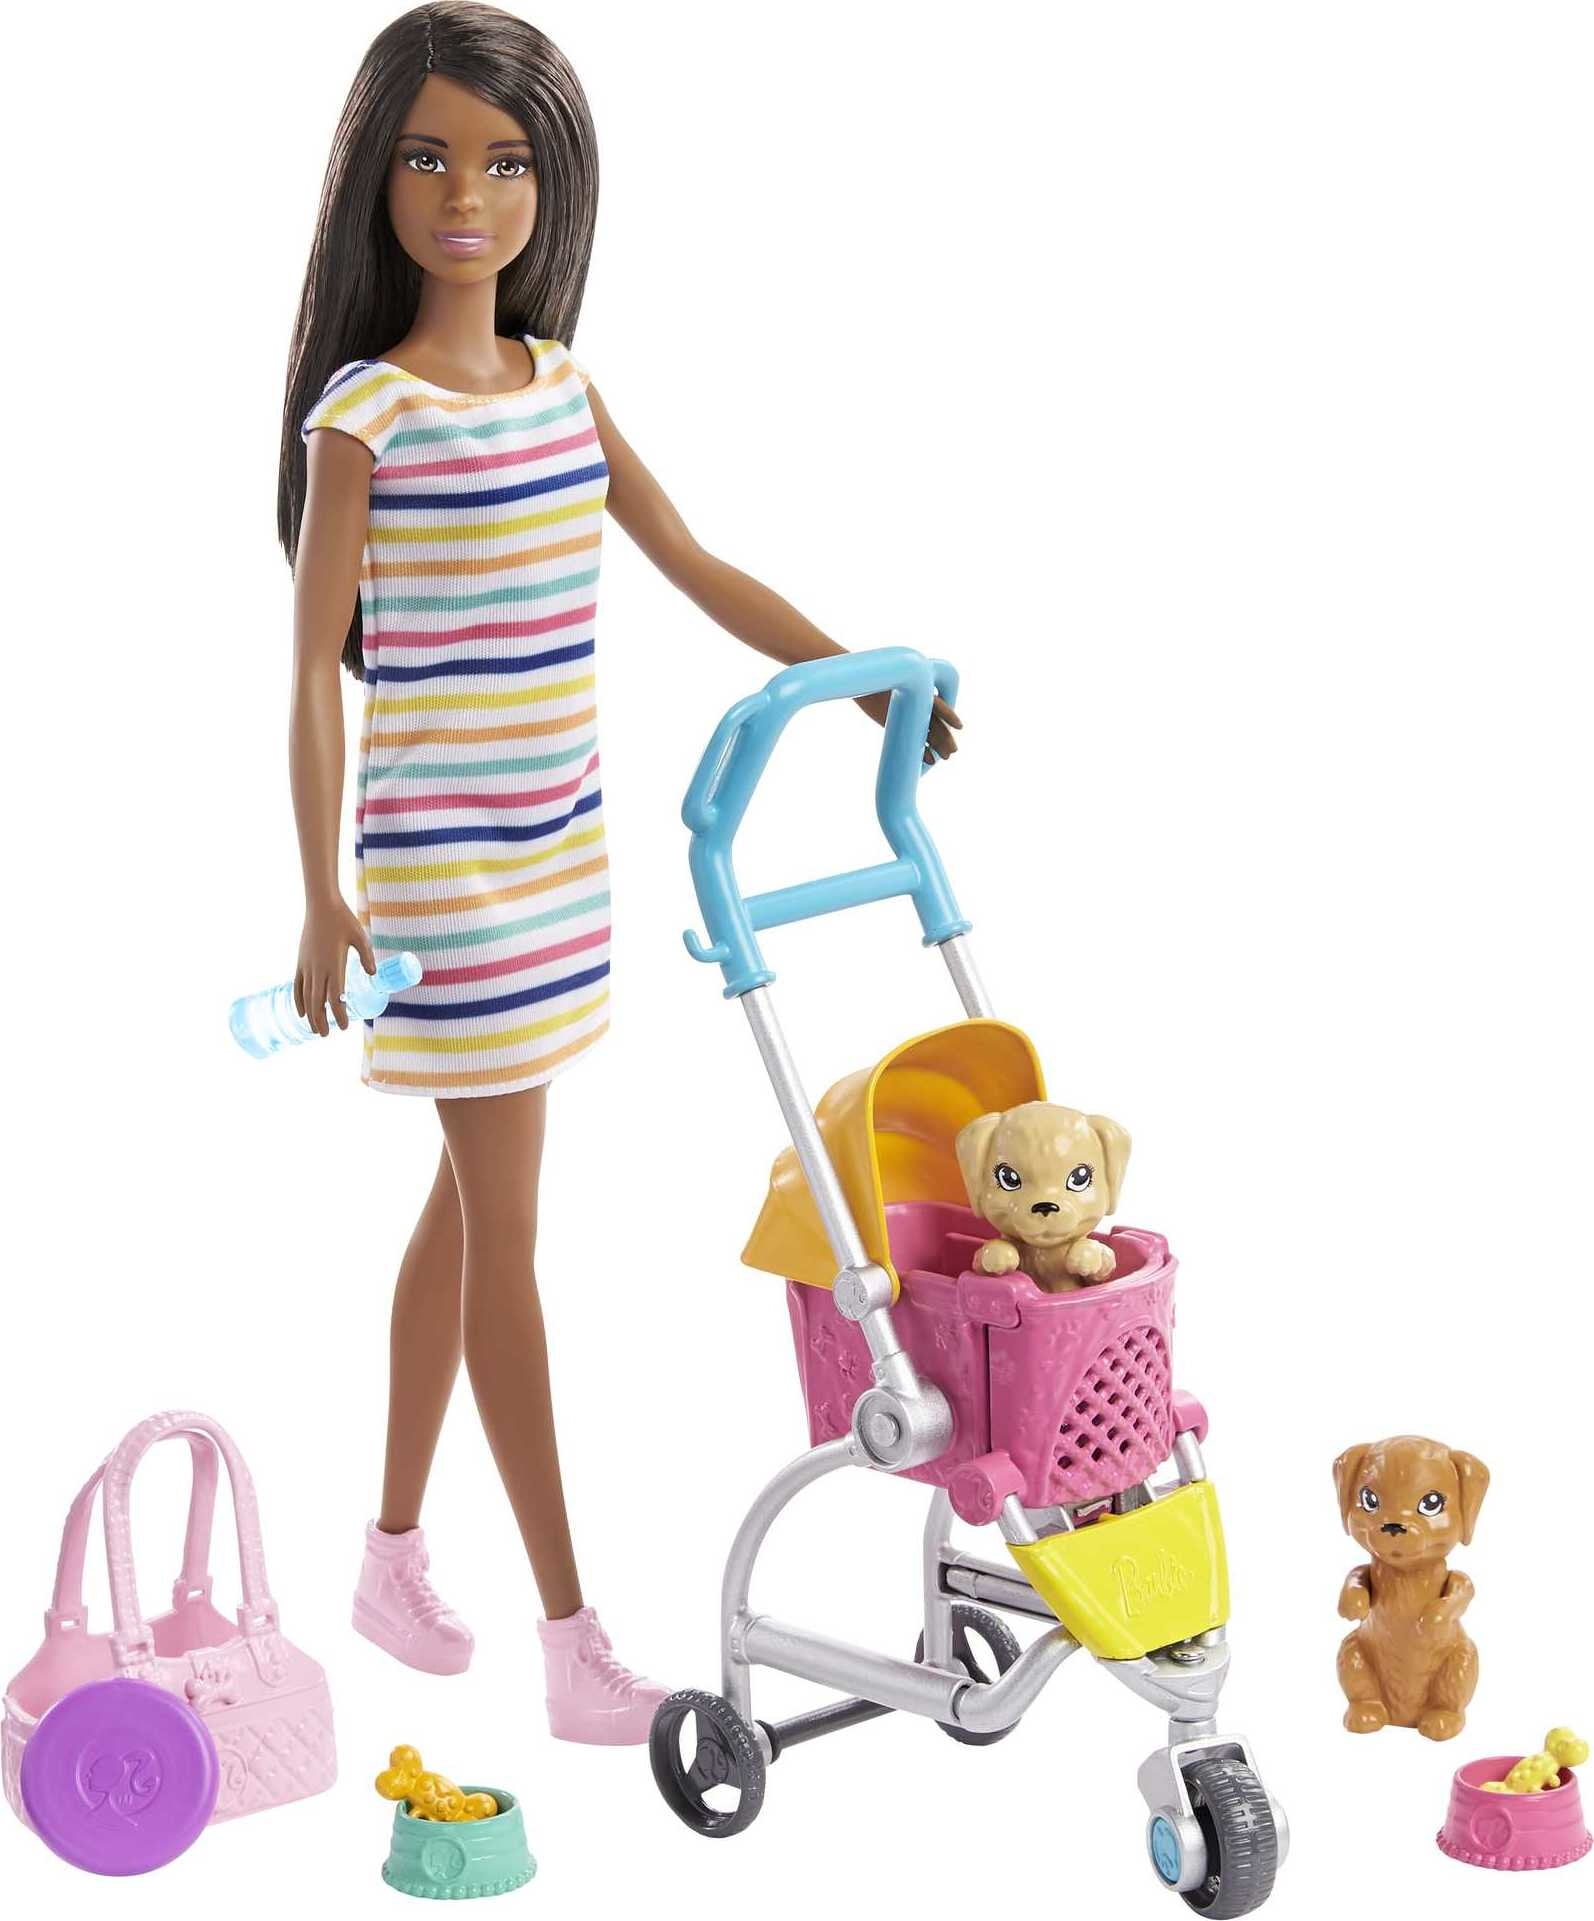 Barbie Stroll & Play Pups Playset with Brunette Doll, Transforming Stroller, 2 Pets & Accessories